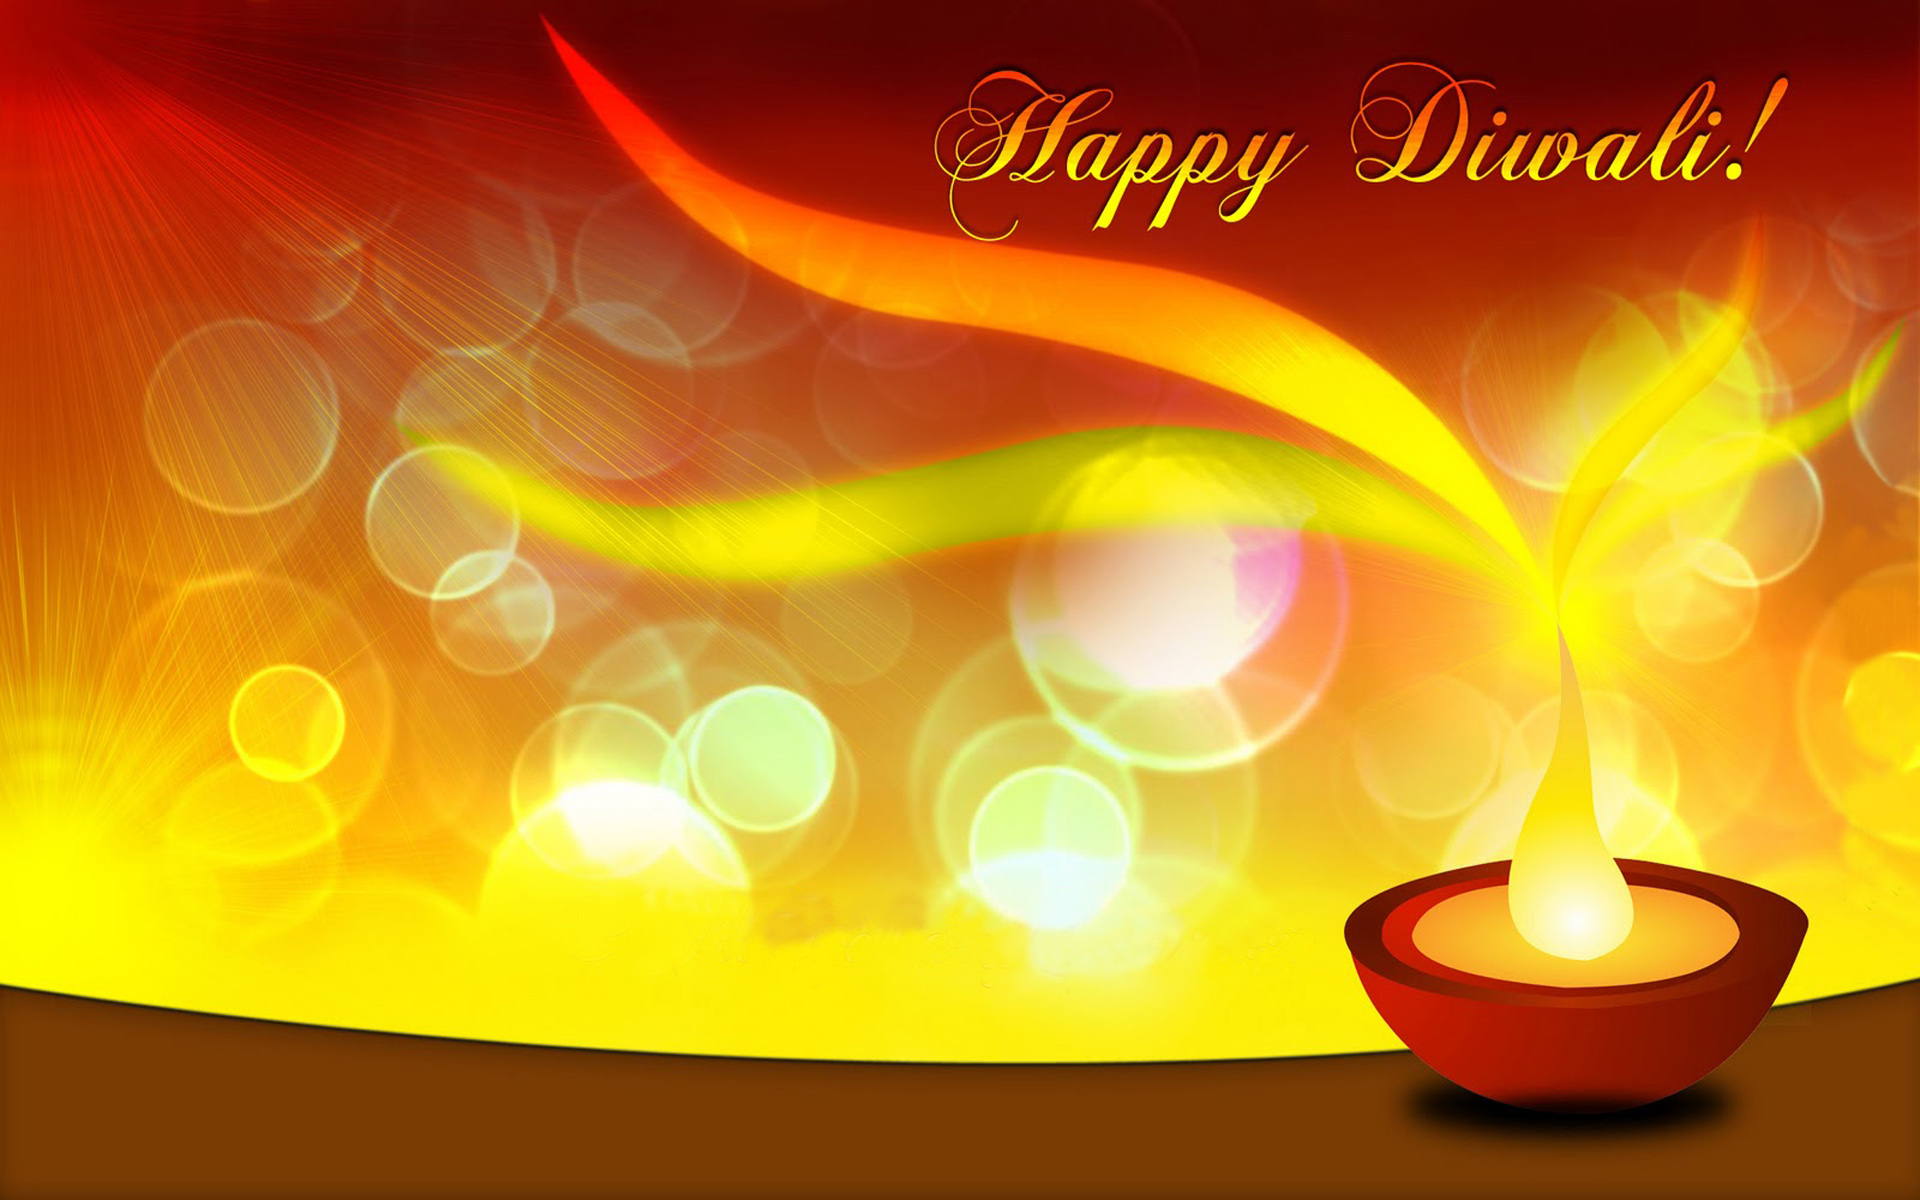 Happy Diwali Religious Background For Diwali Festival With Lamp